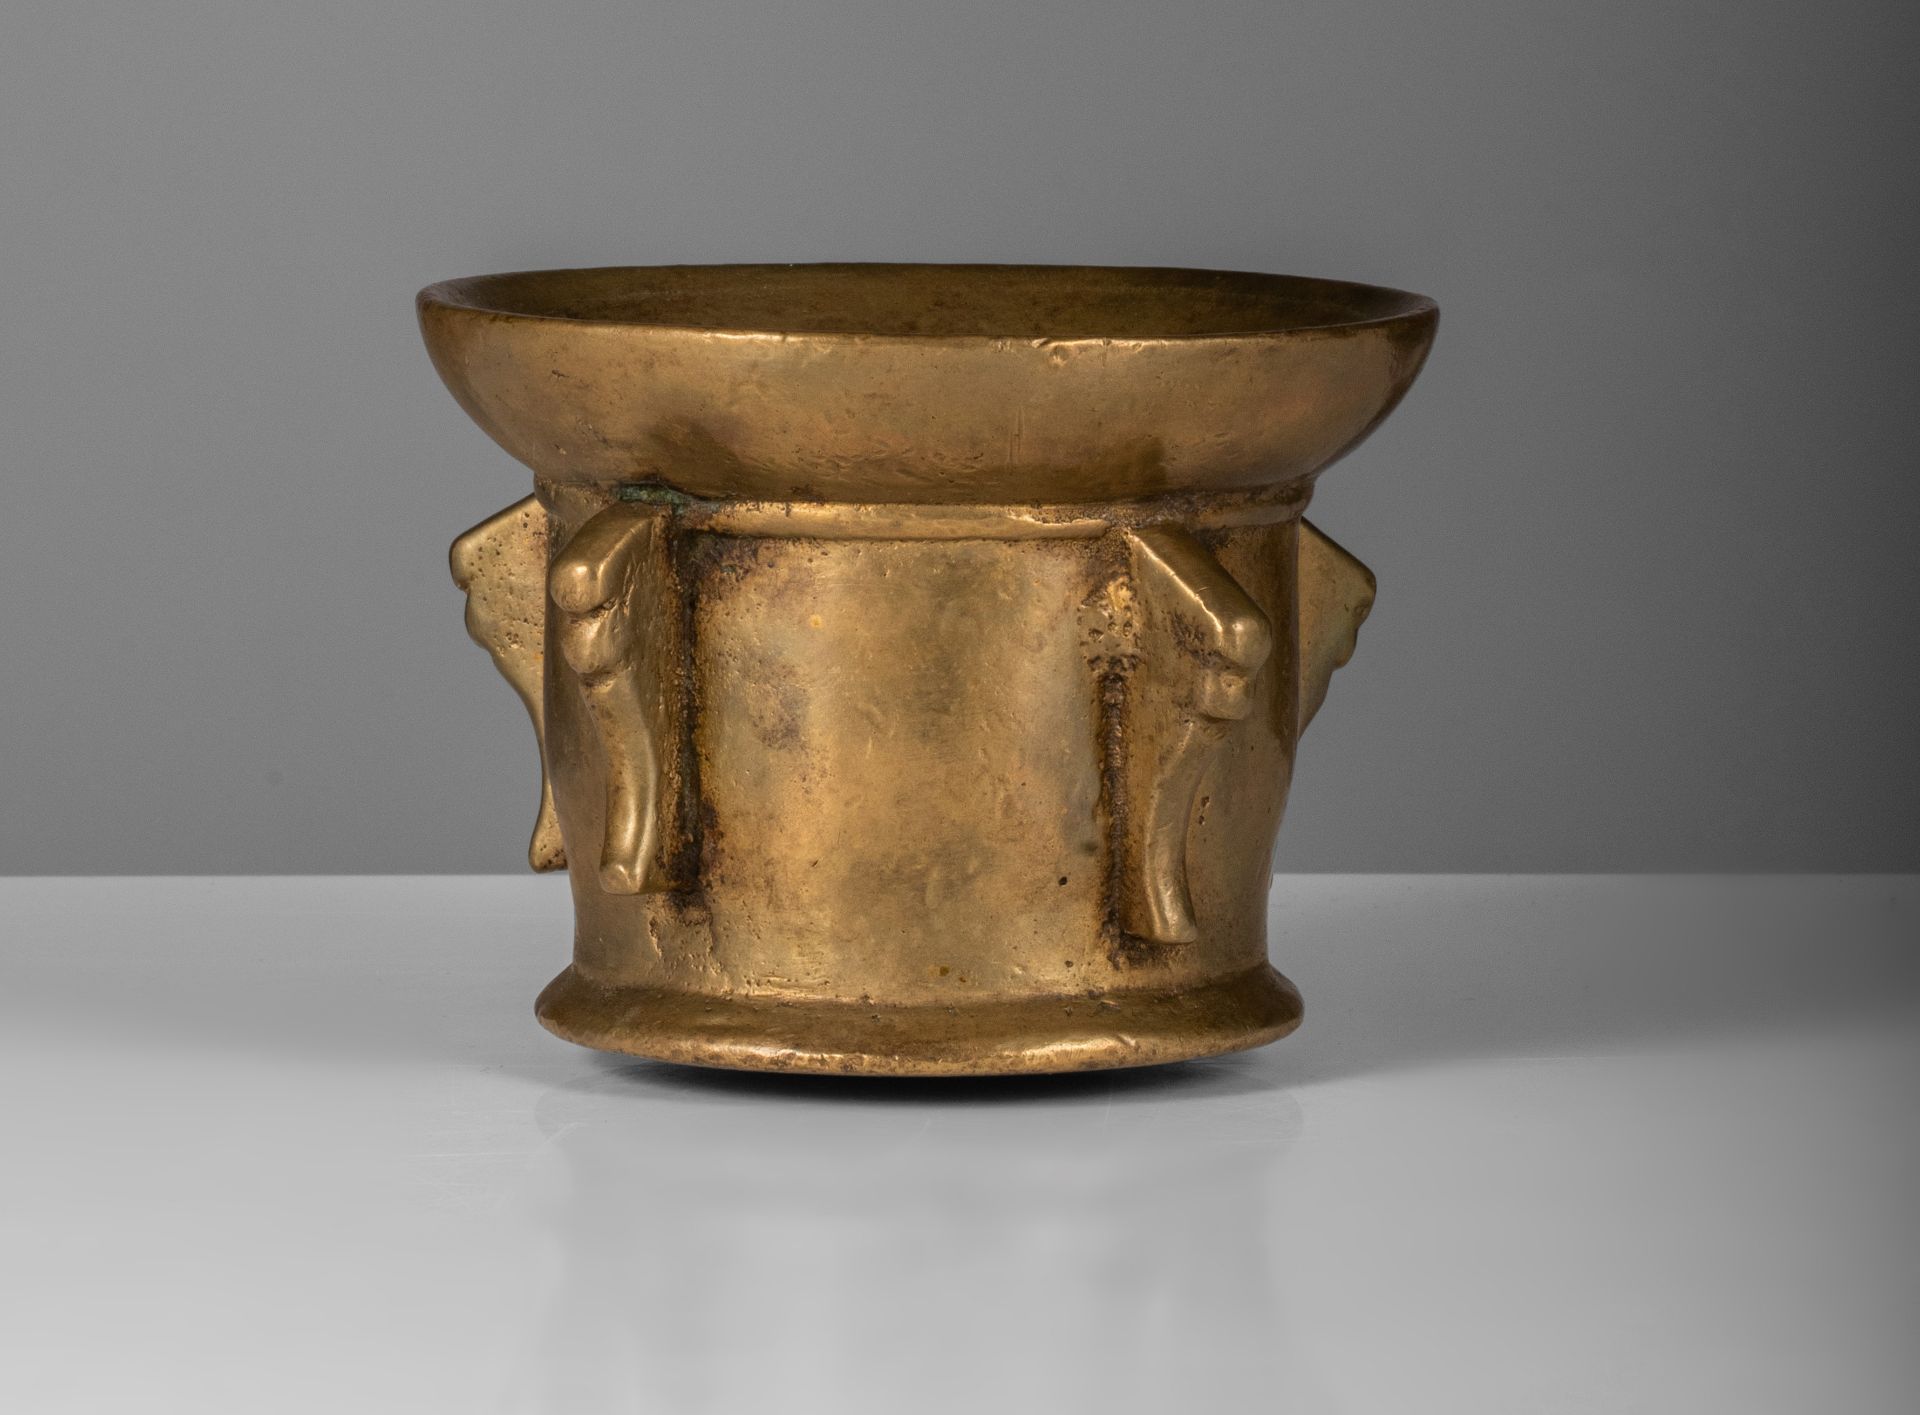 (BIDDING ONLY ON CARLOBONTE.BE) A 17thC Spanish bronze mortar, with matching pestle, and a Baroque b - Image 6 of 13